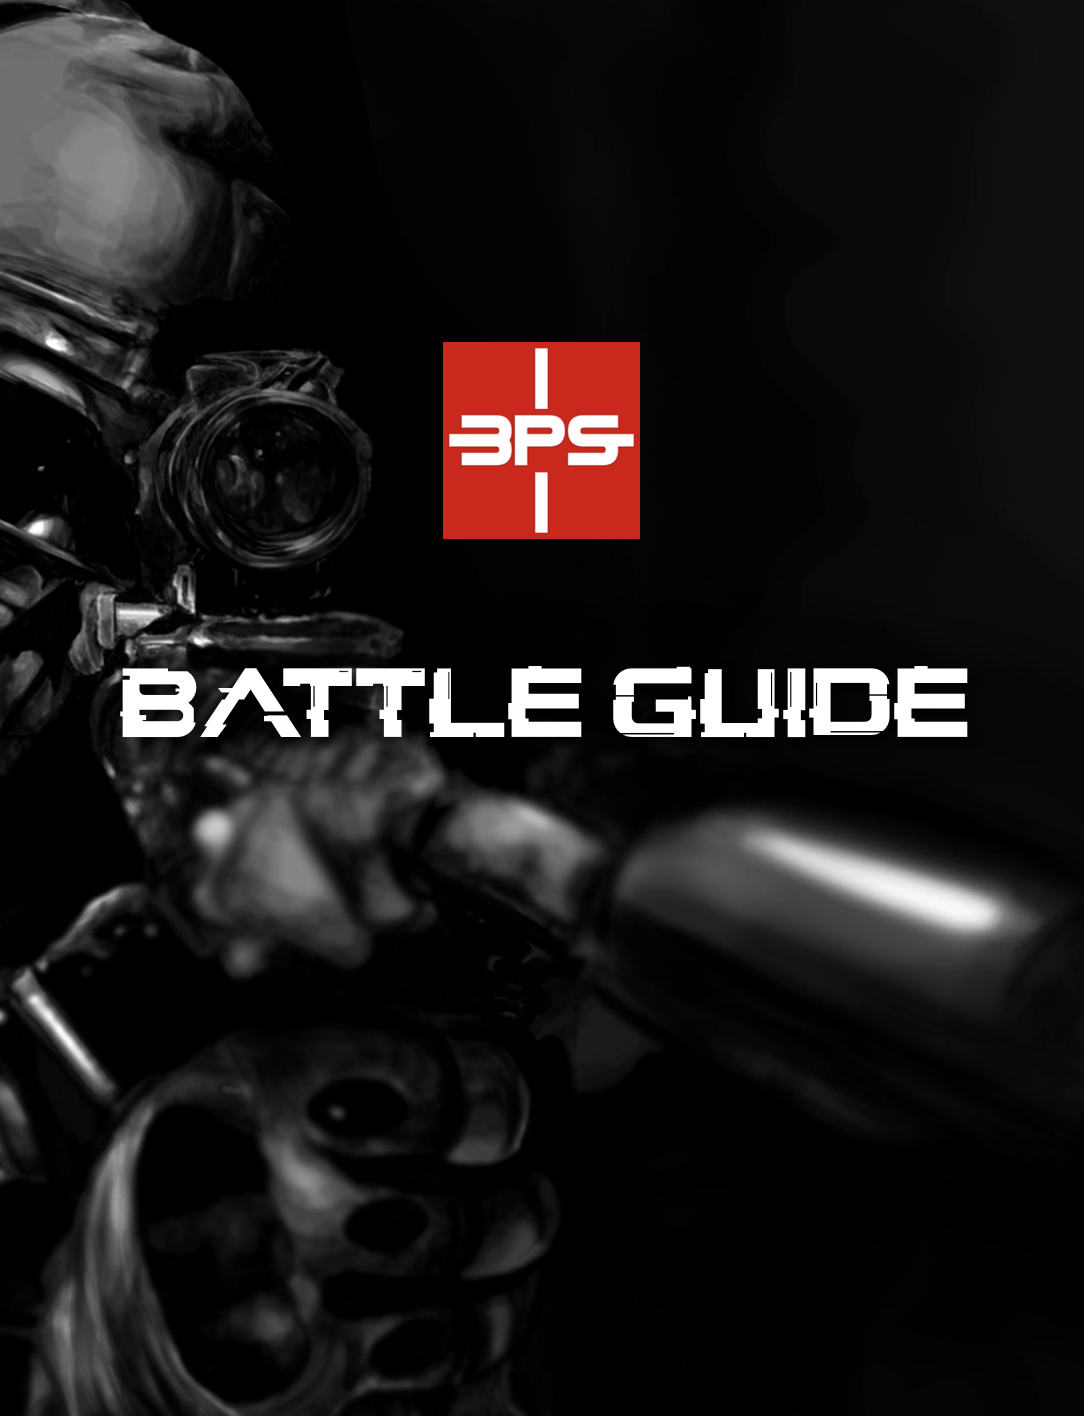 The 3PS Battle Guide